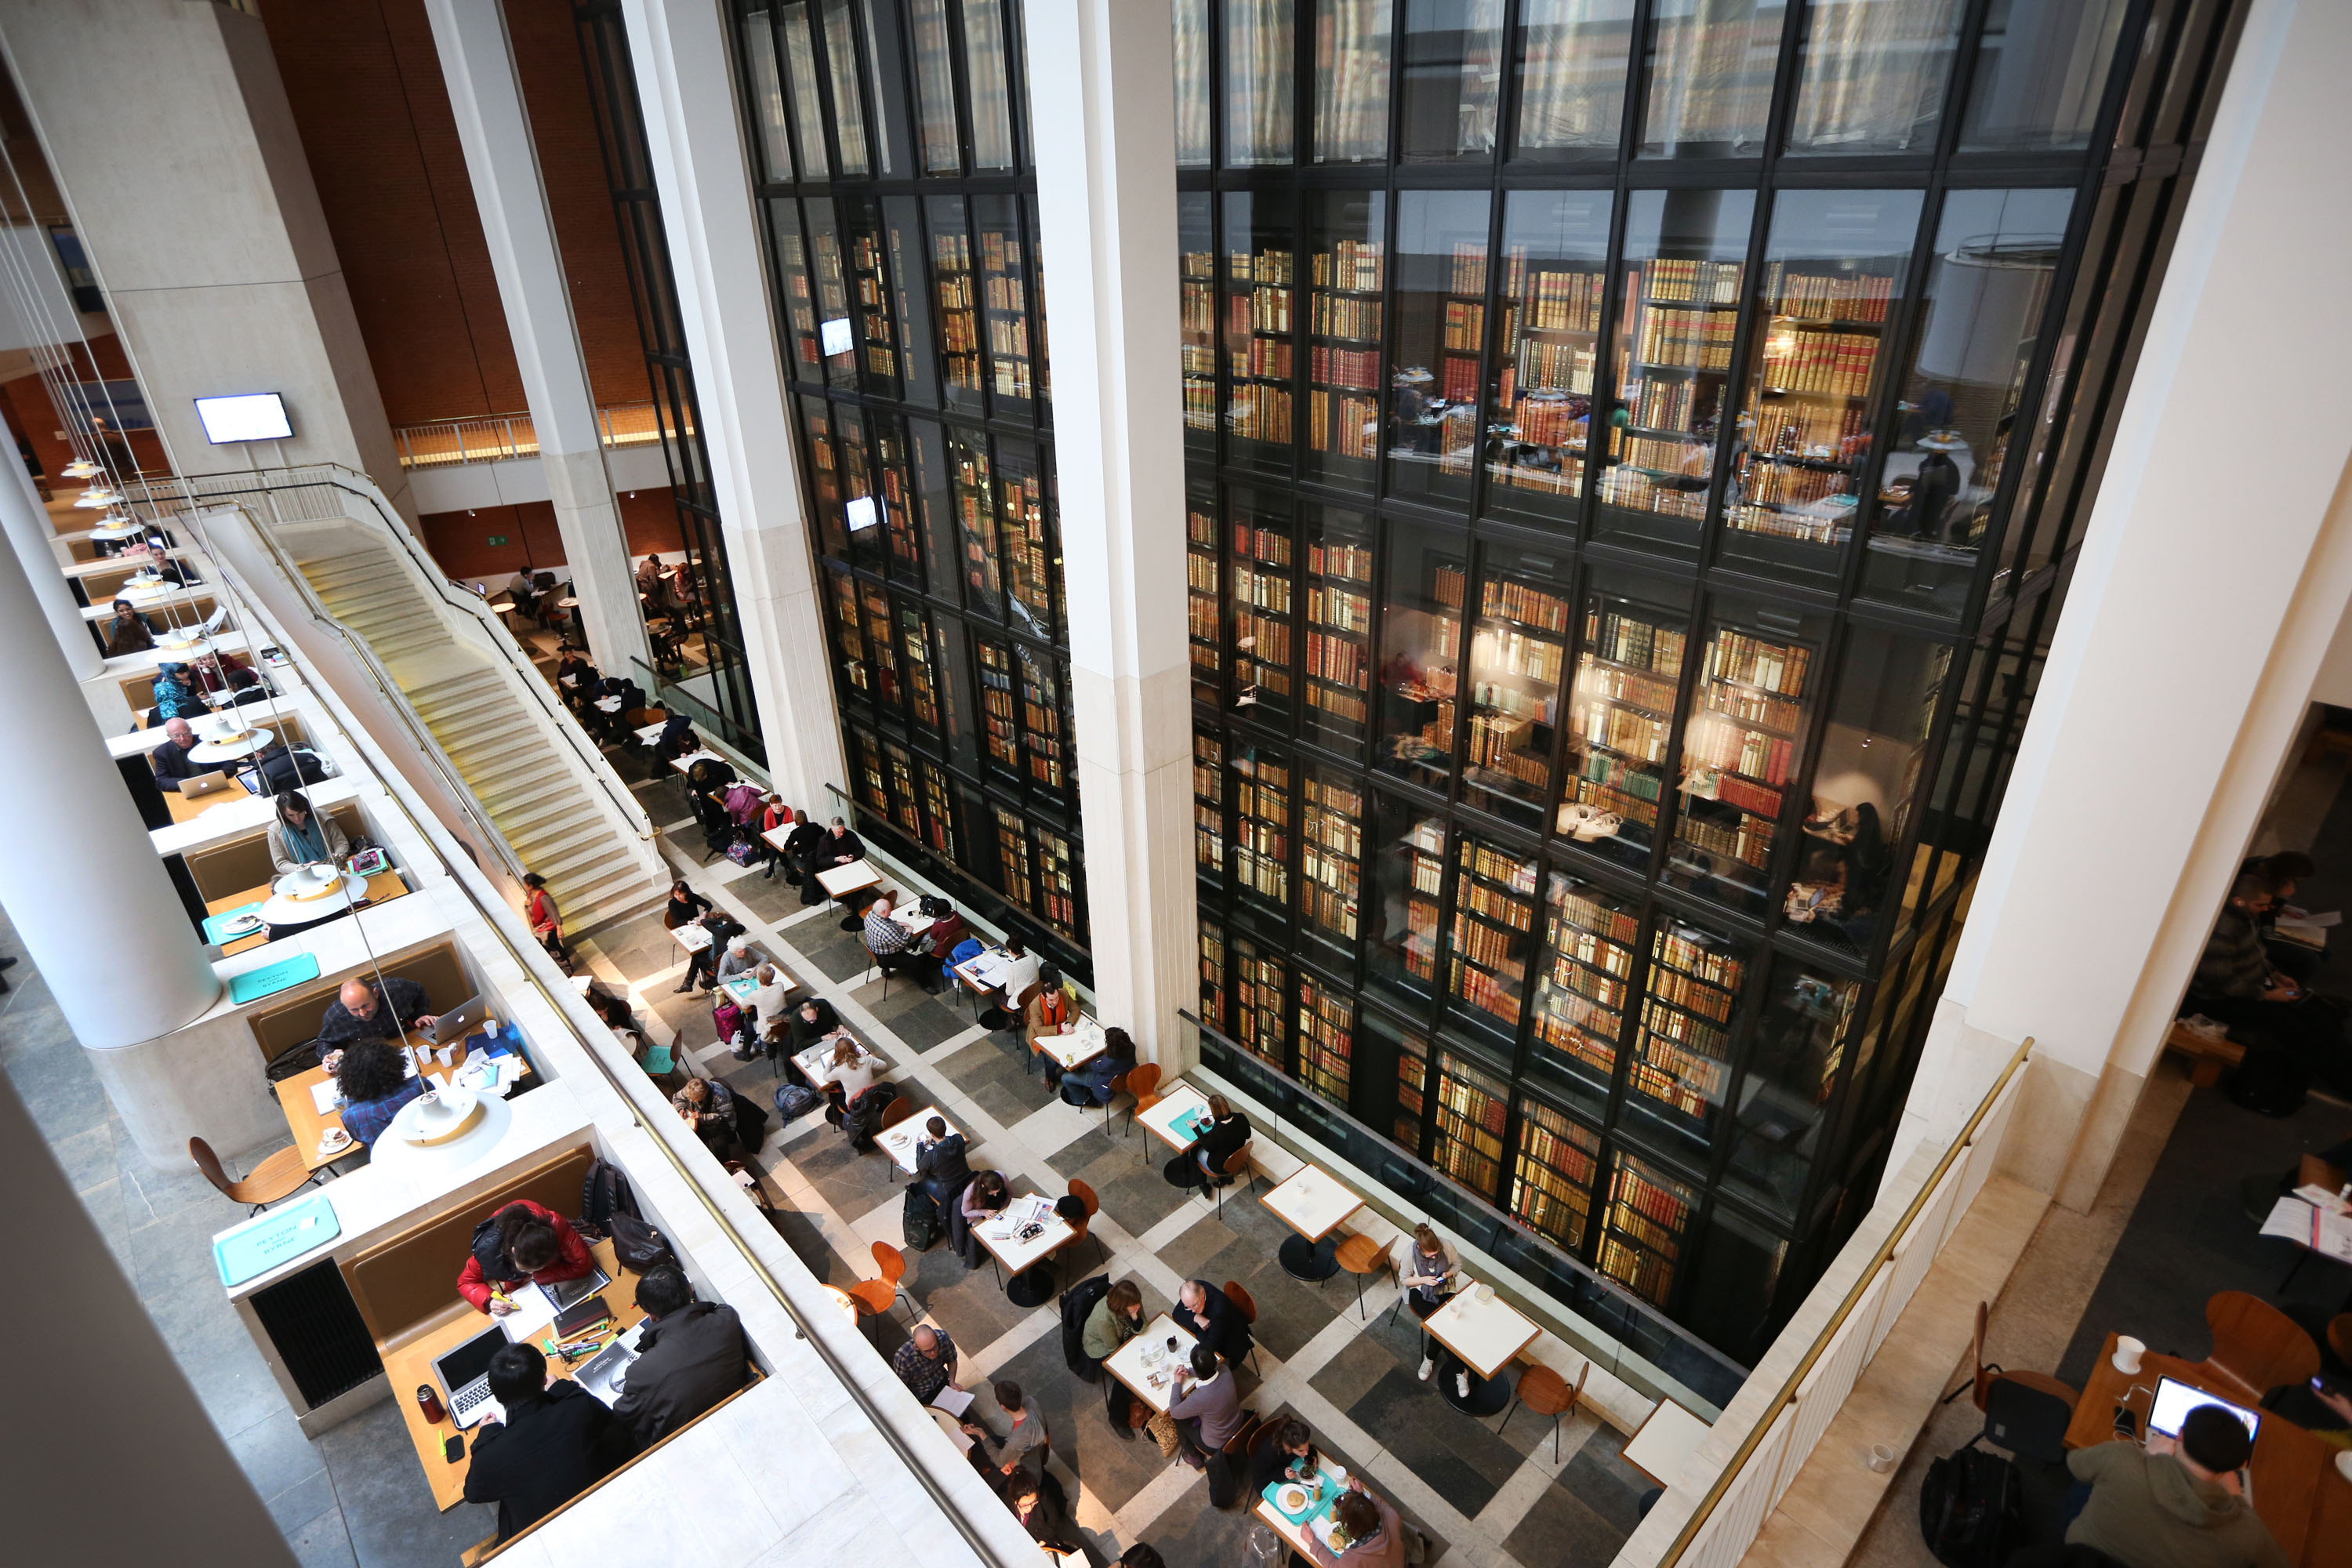 Visitors&nbsp;at The British Library in London.